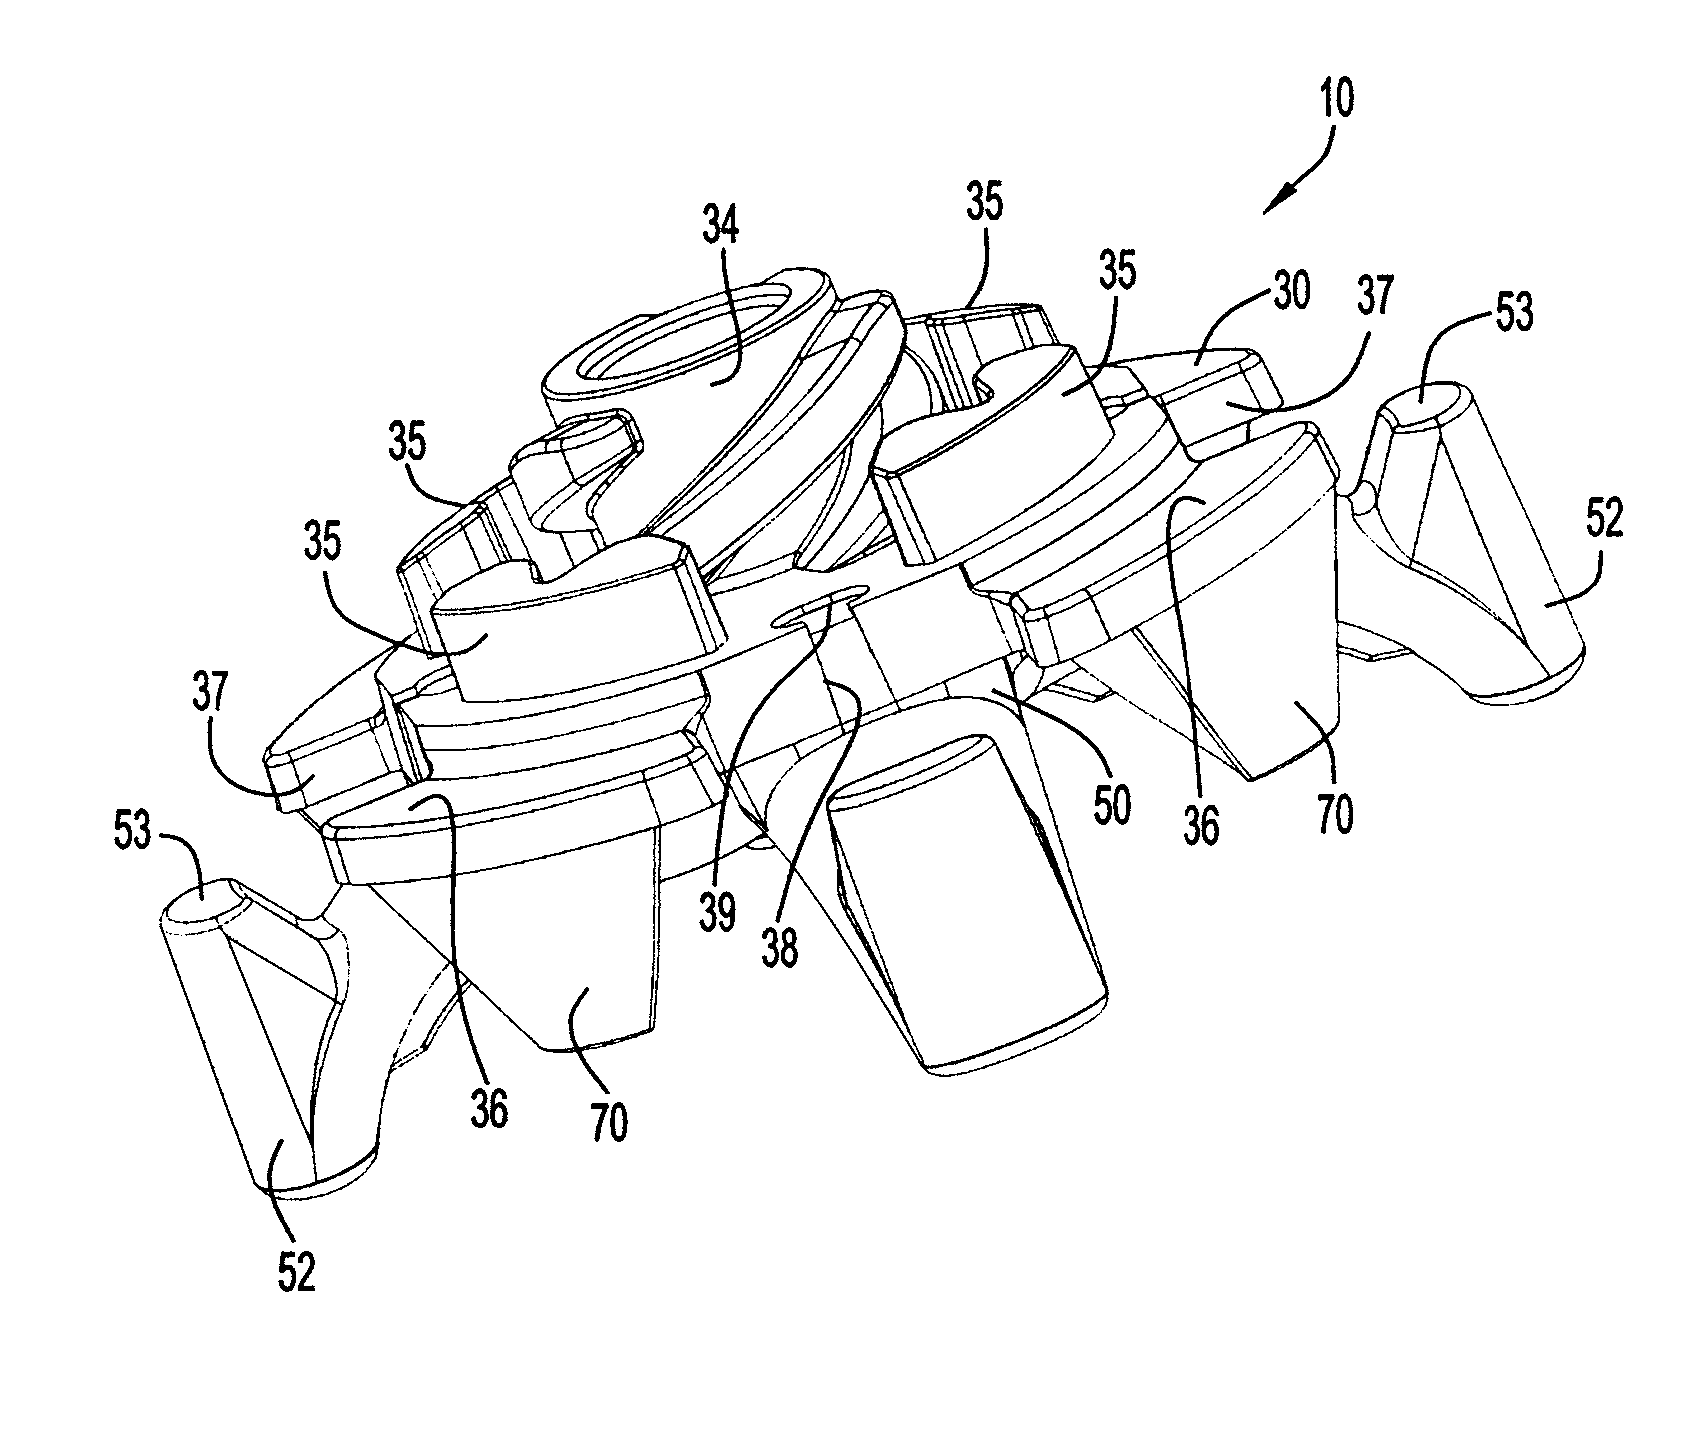 Athletic Shoe Cleat With Dynamic Traction and Method of Making and Using Same